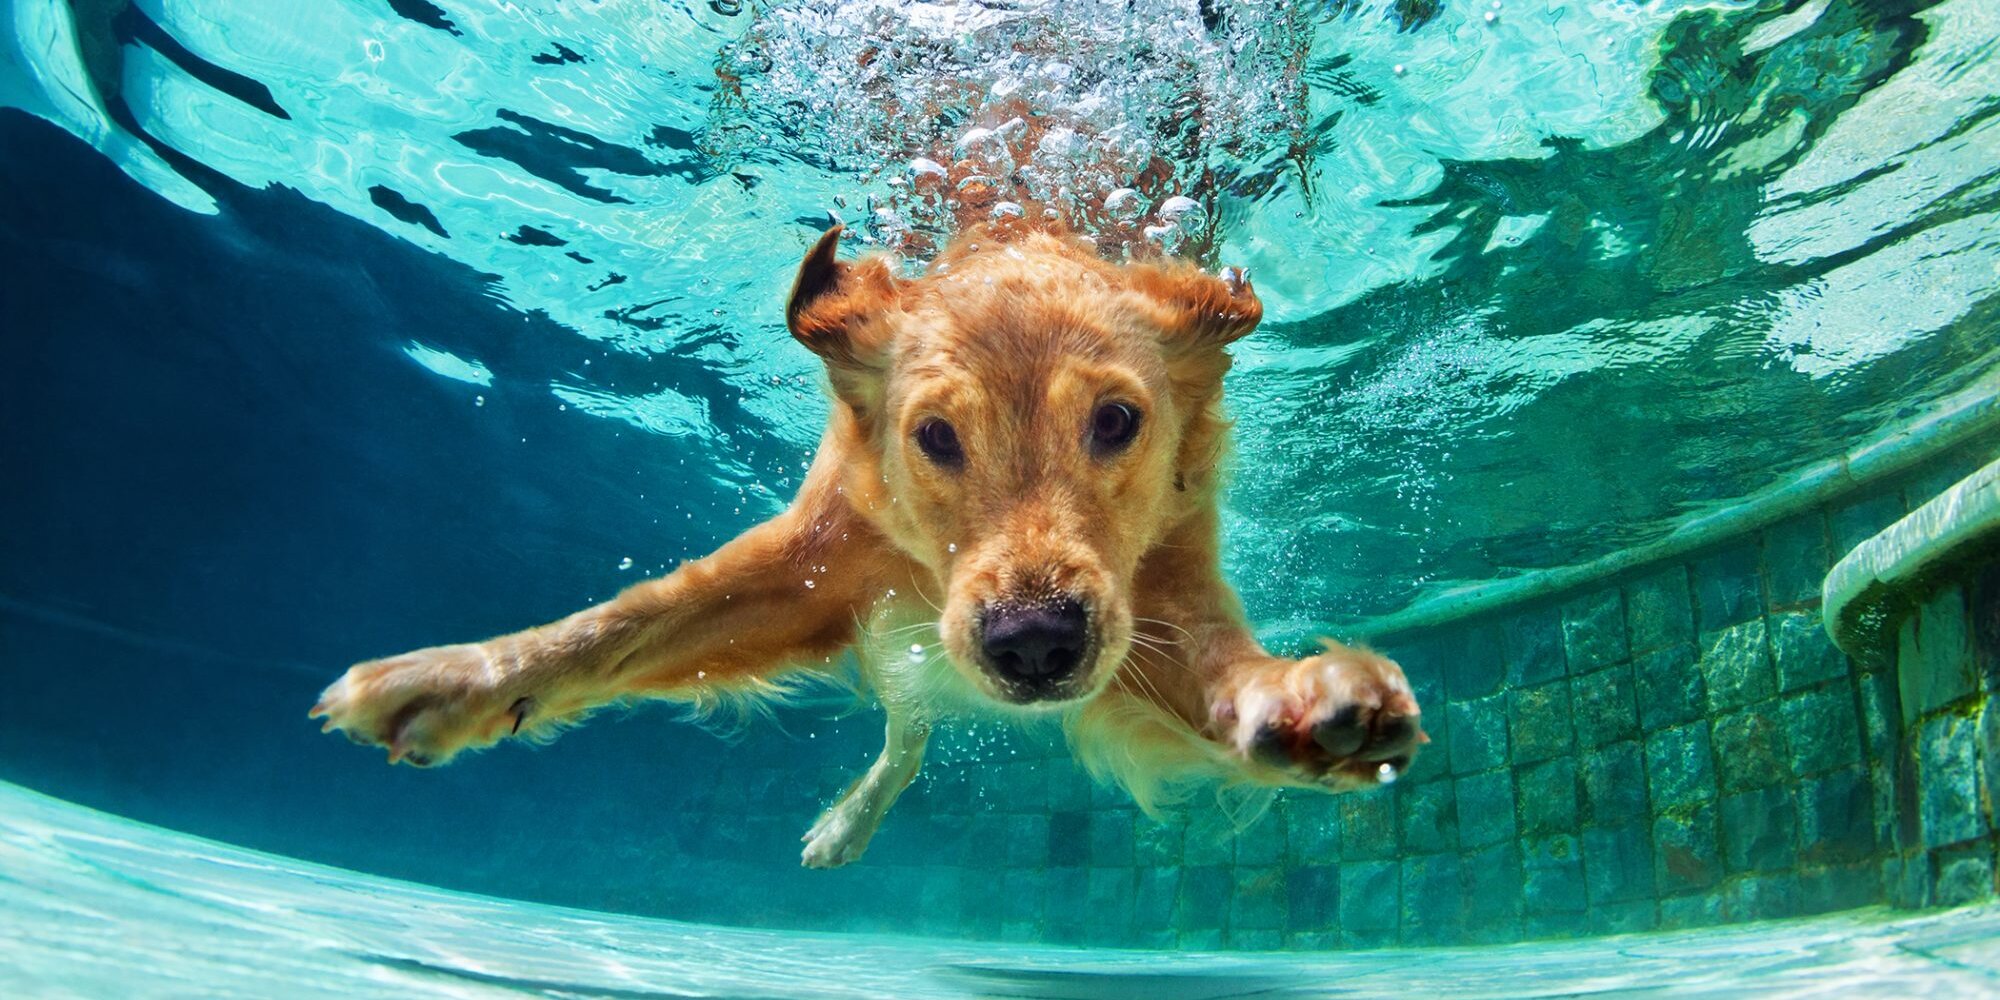 The dog learns to swim